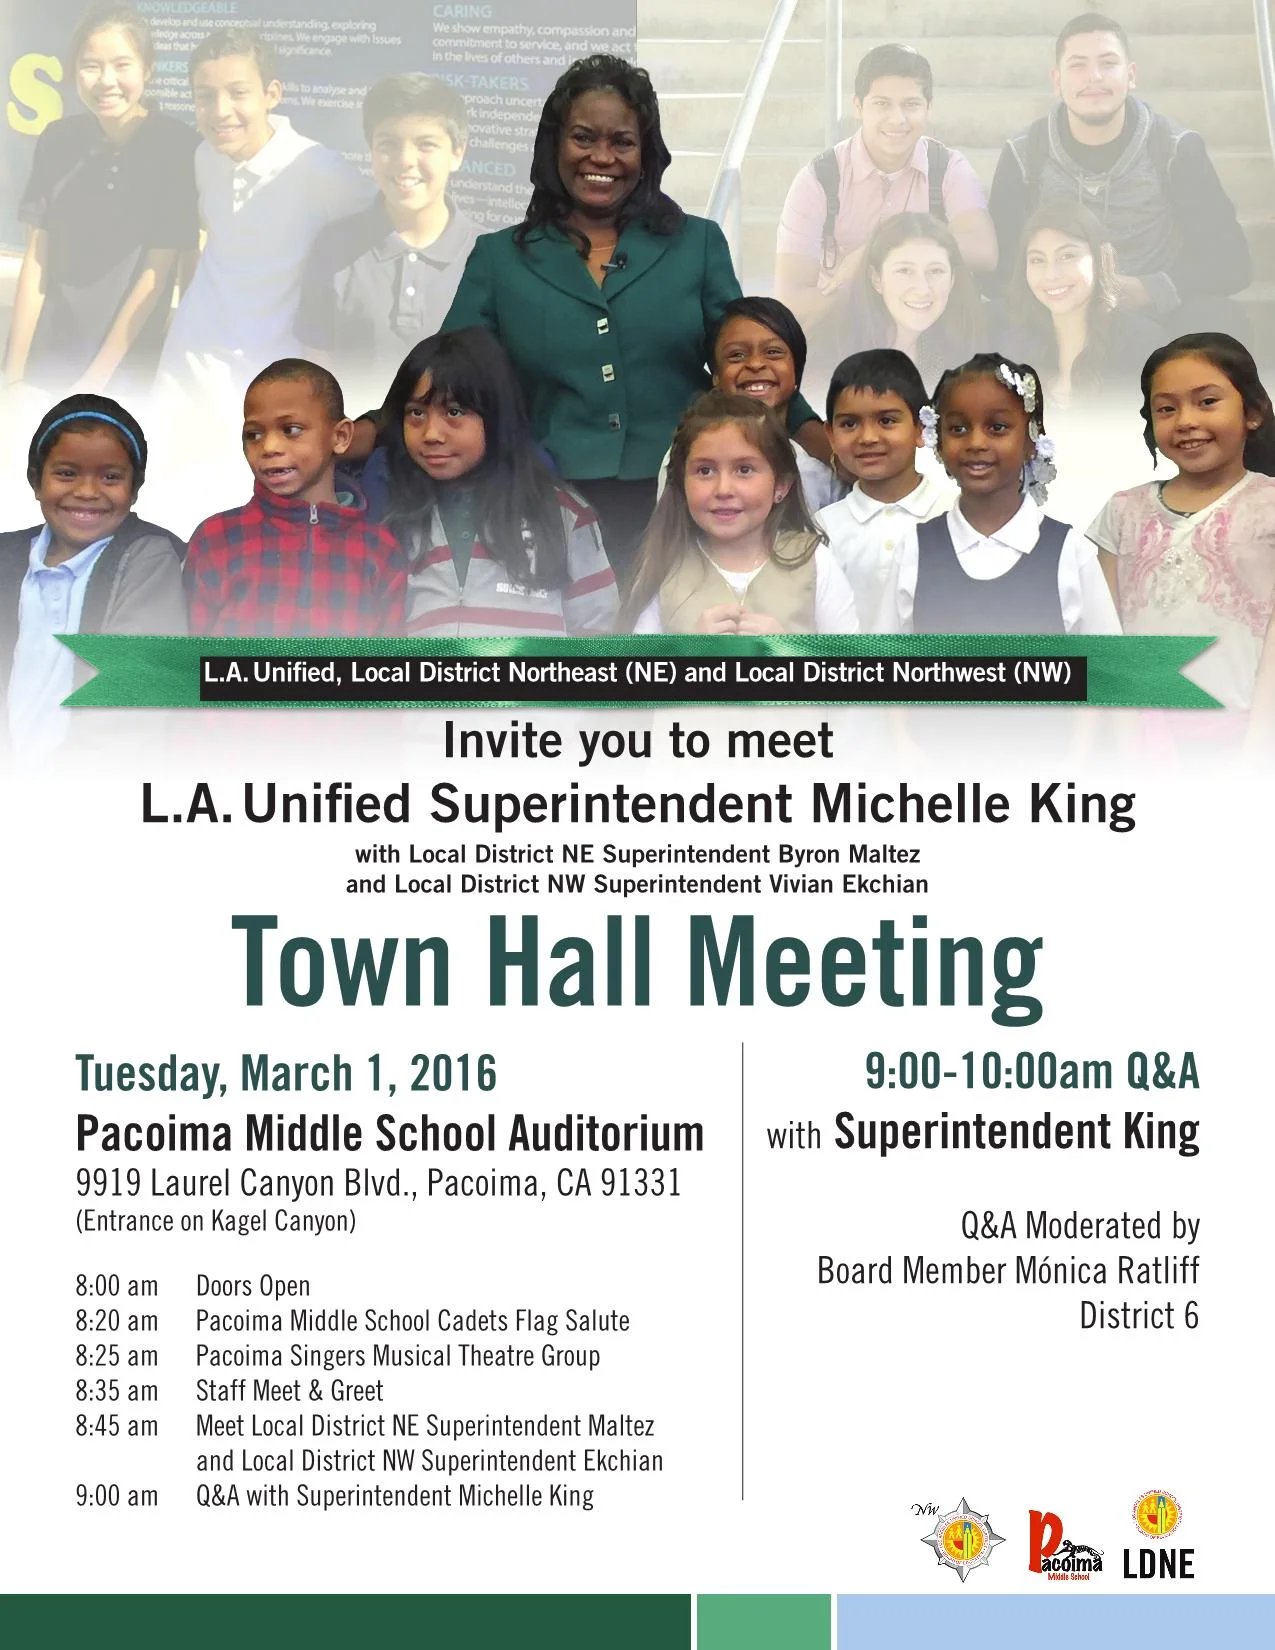 LA Unified Town Hall Meeting